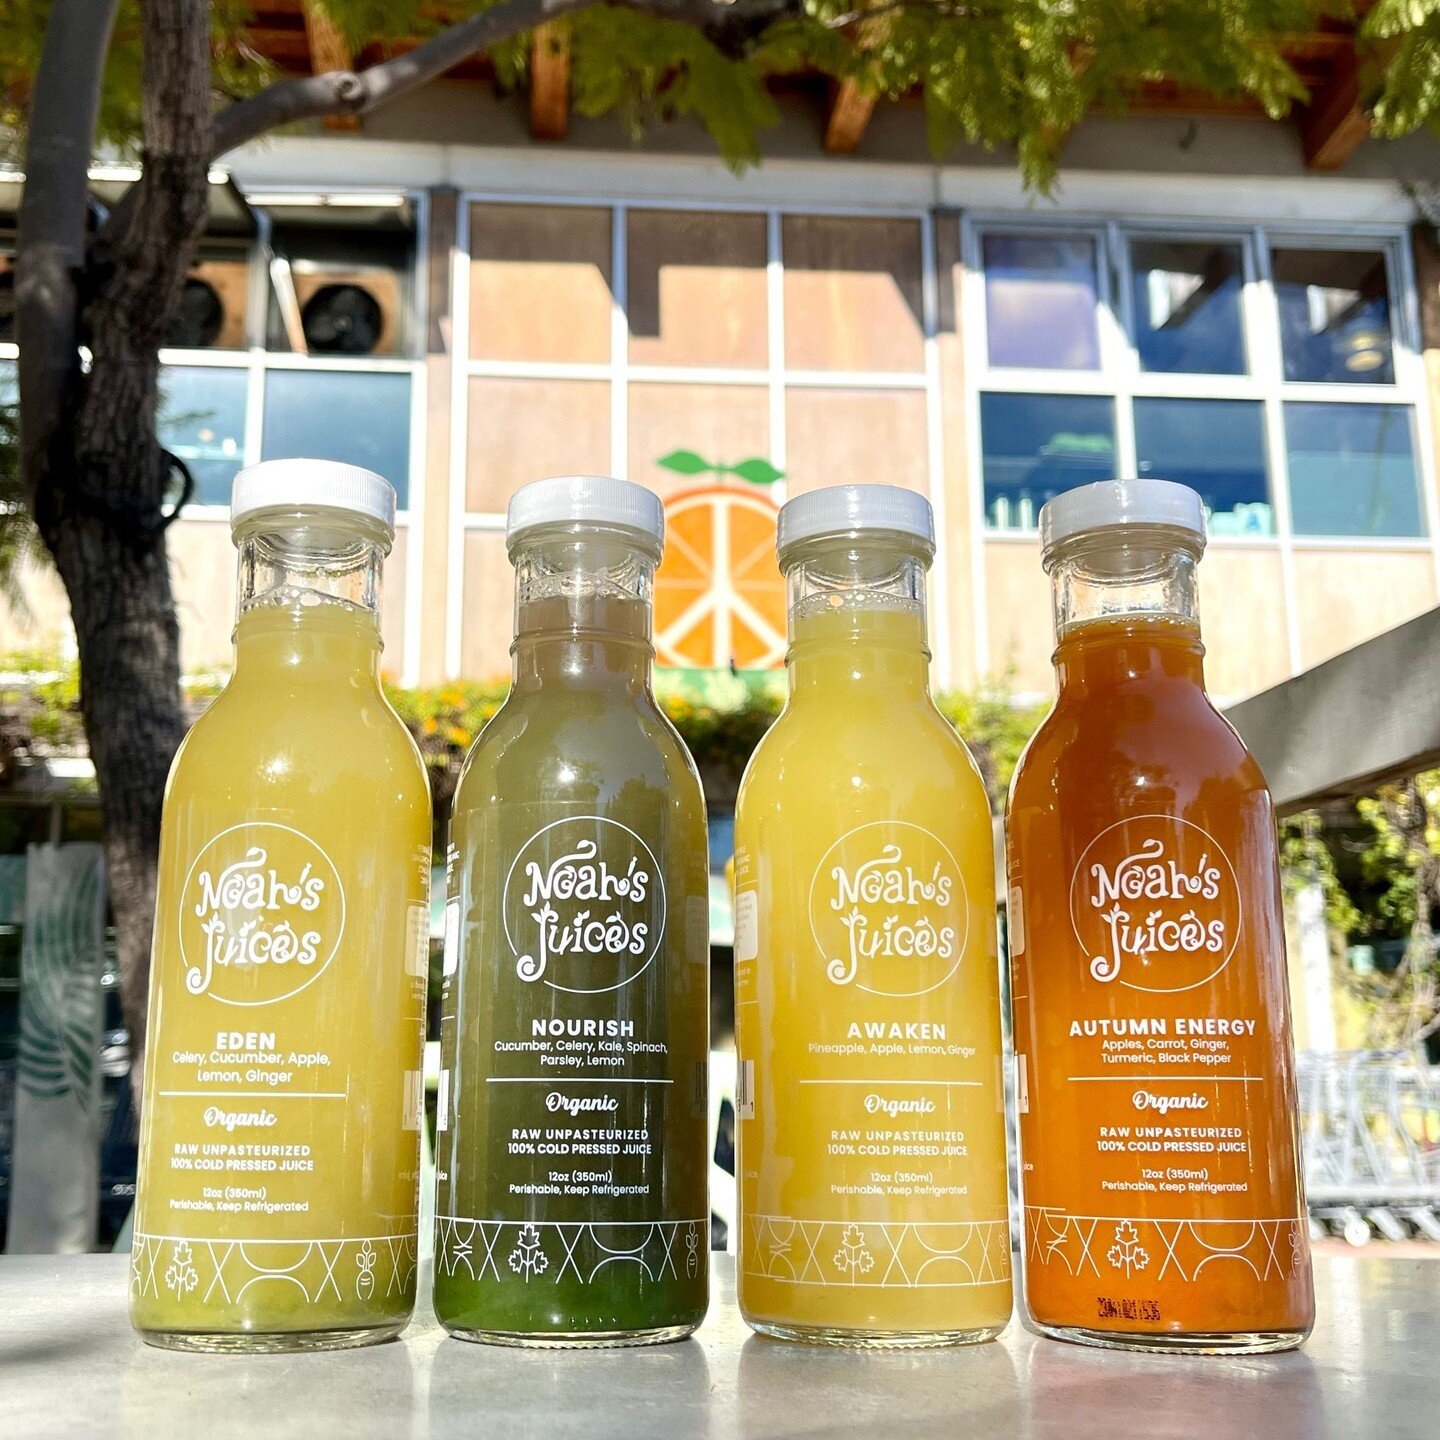 New! Noah's Juices are here and we have some amazing varieties for you to try 😁 These juices are locally produced, all organic, raw, 100% cold pressed juices!⁠
+ they come in glass bottles! Just rinse &amp; recyle/reuse ♻️⁠
⁠
🍎 Autumn Energy - Appl